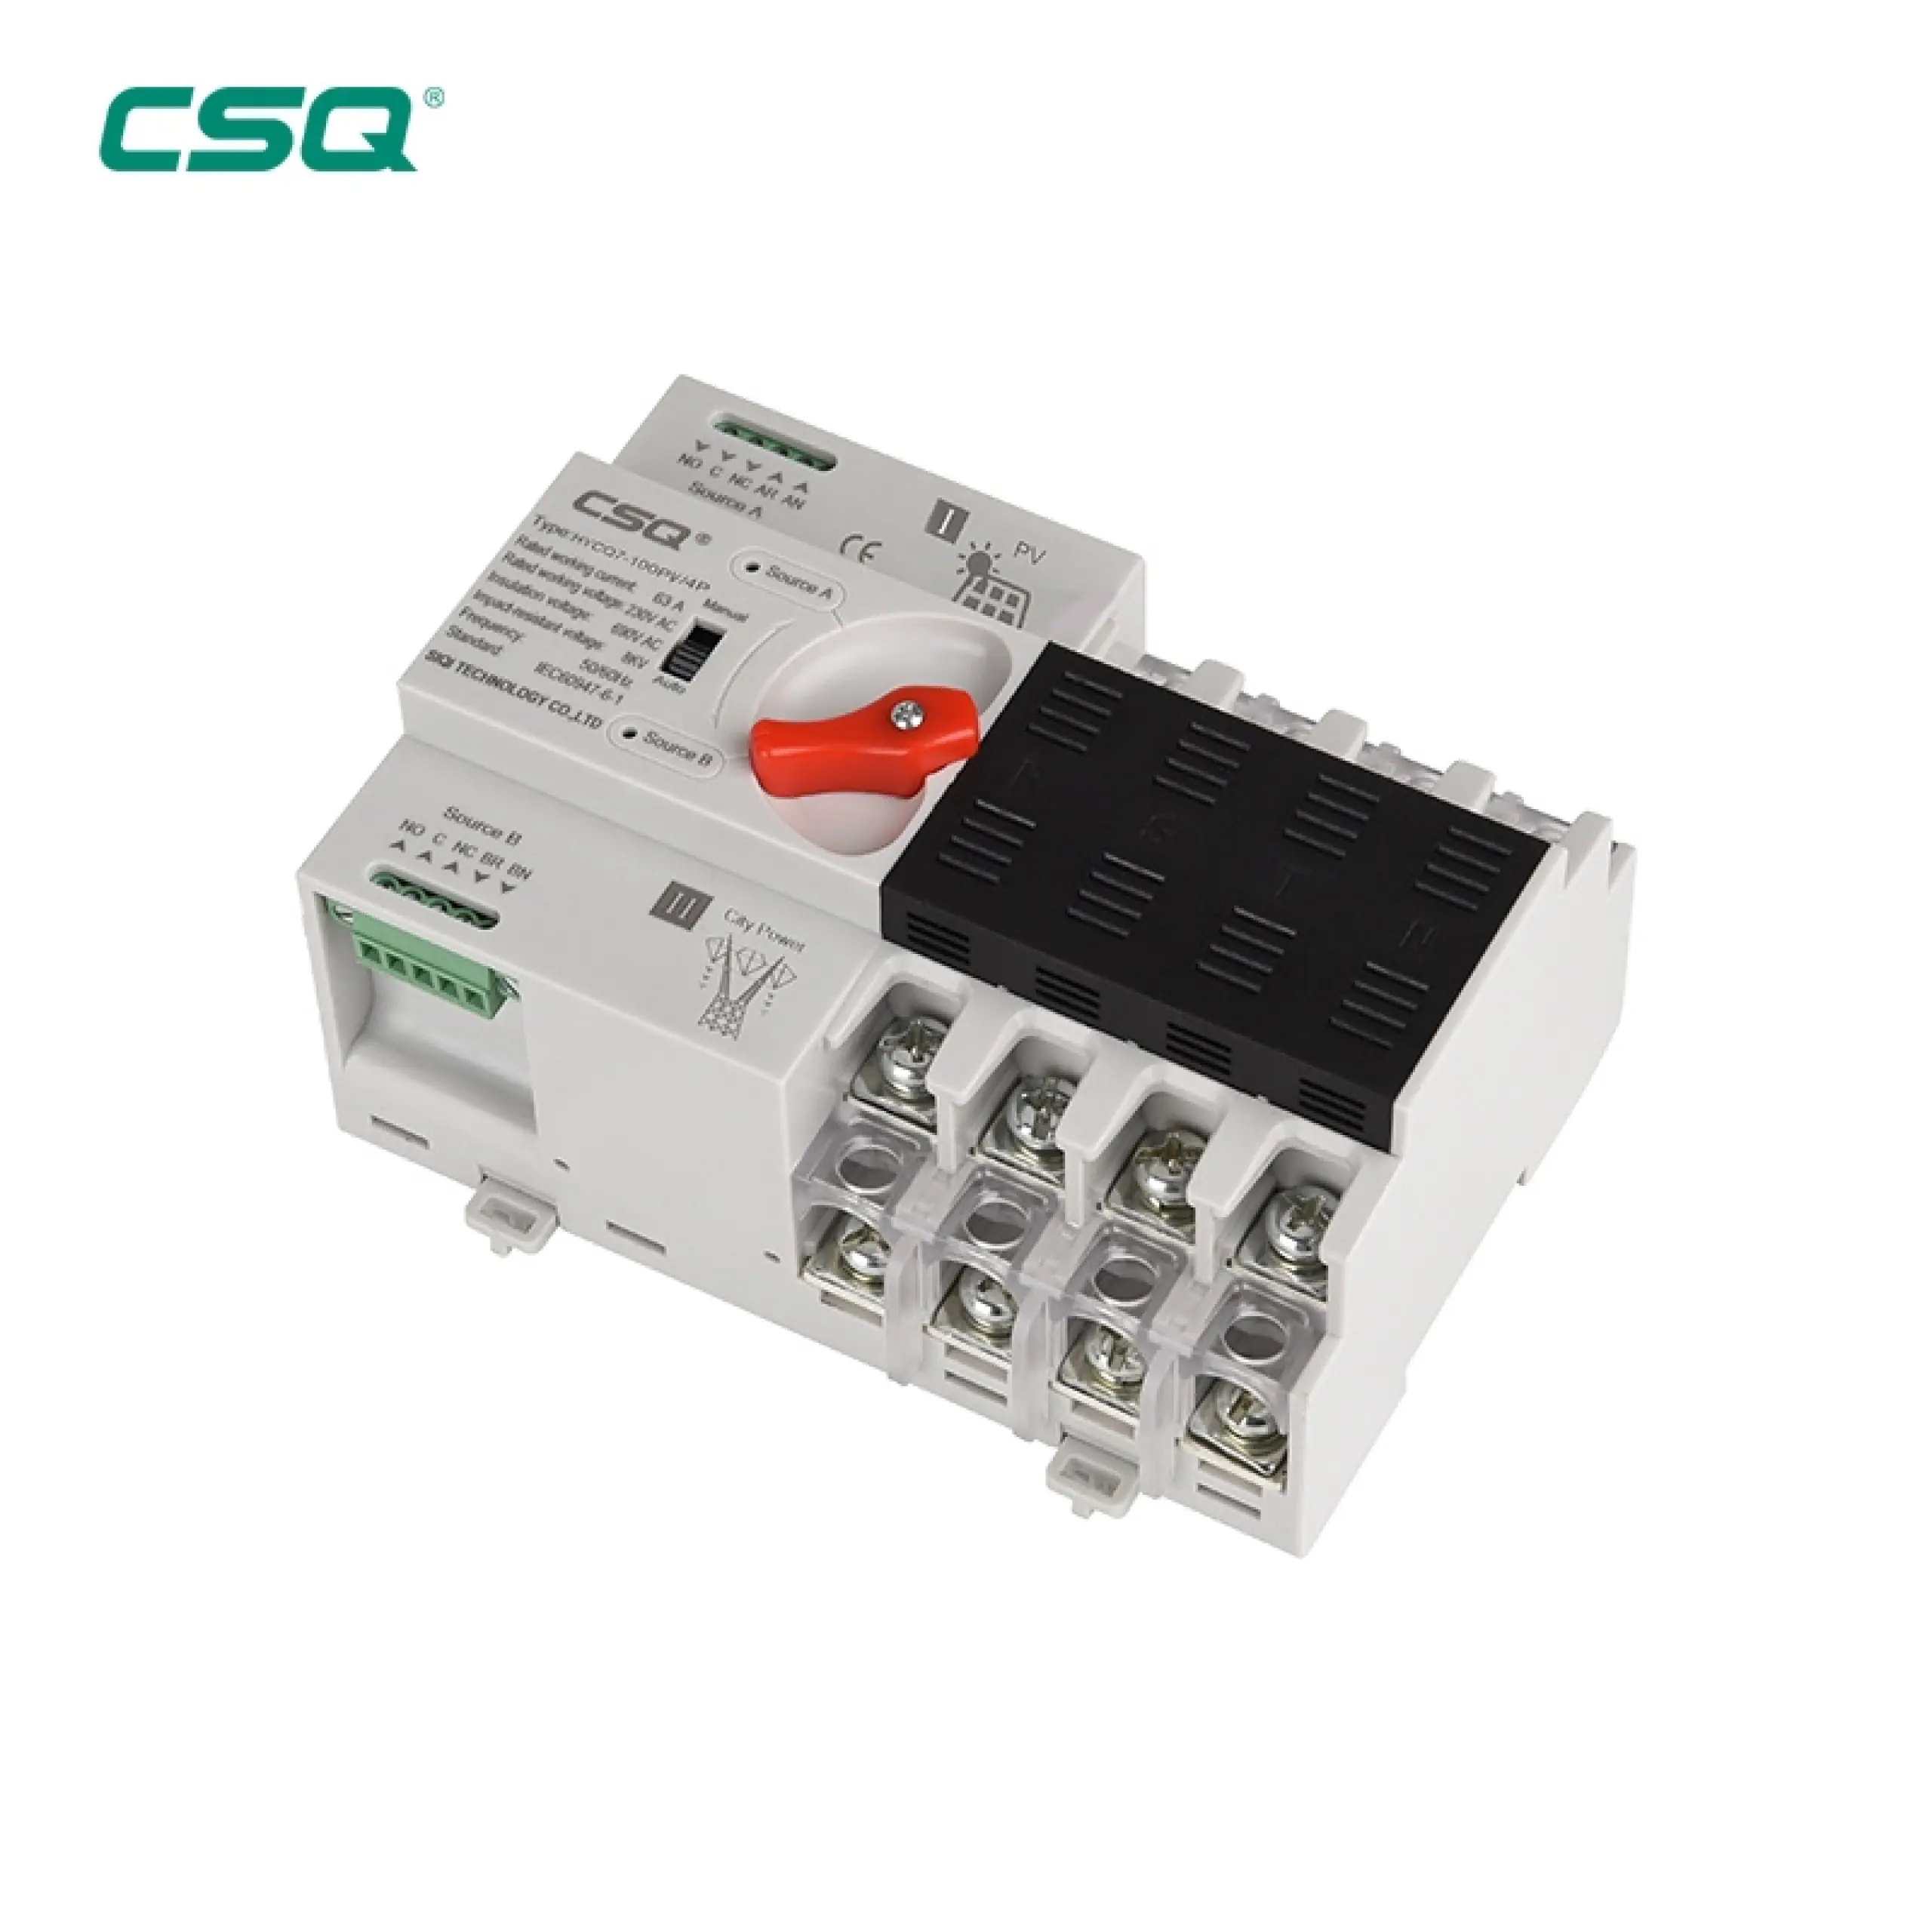 Mains Transfer Switch